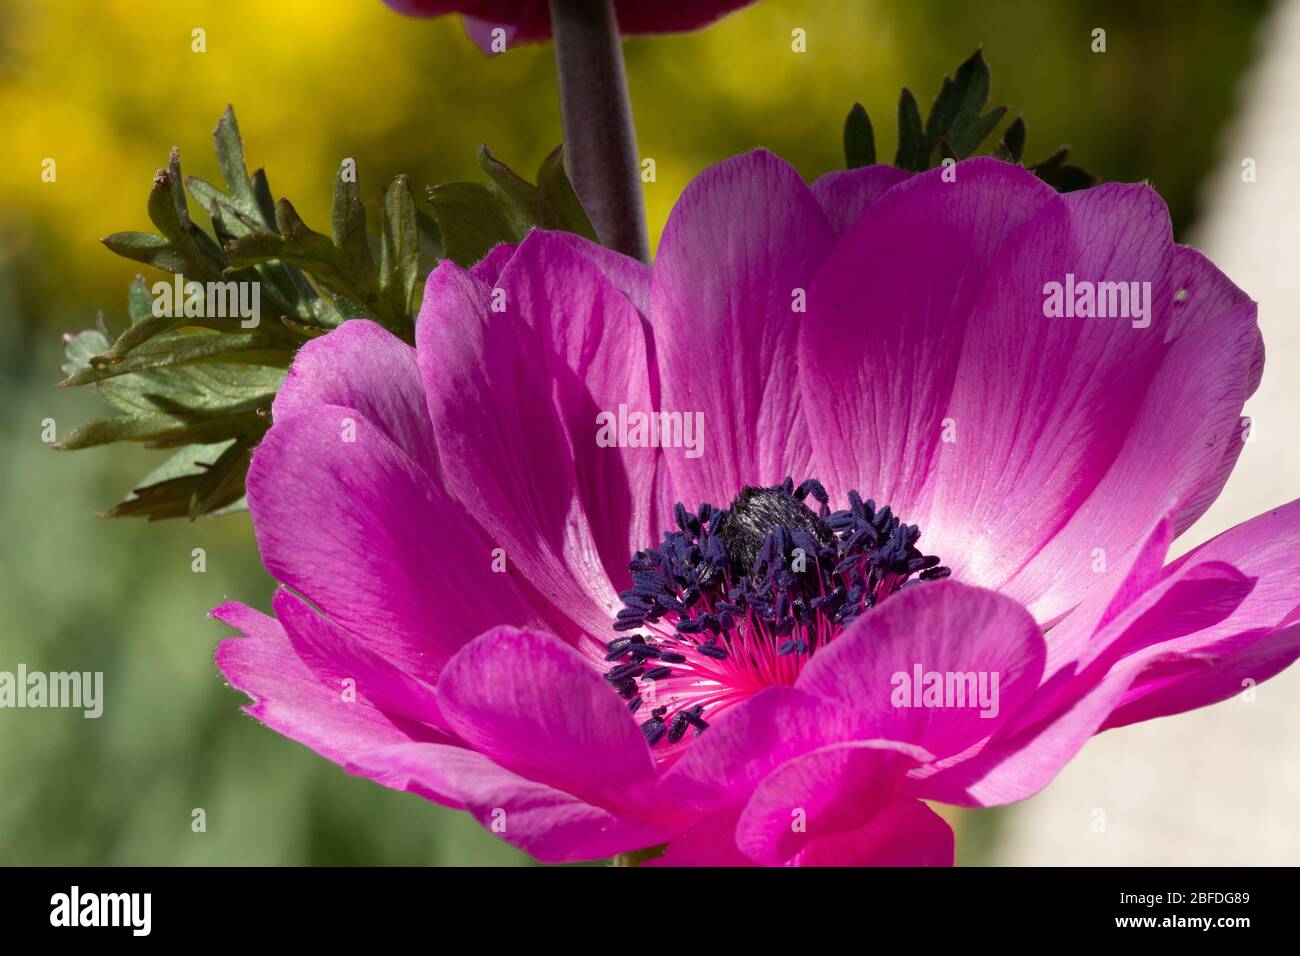 Close-up of a purple anemone with a blurry background background in yellow and green Stock Photo